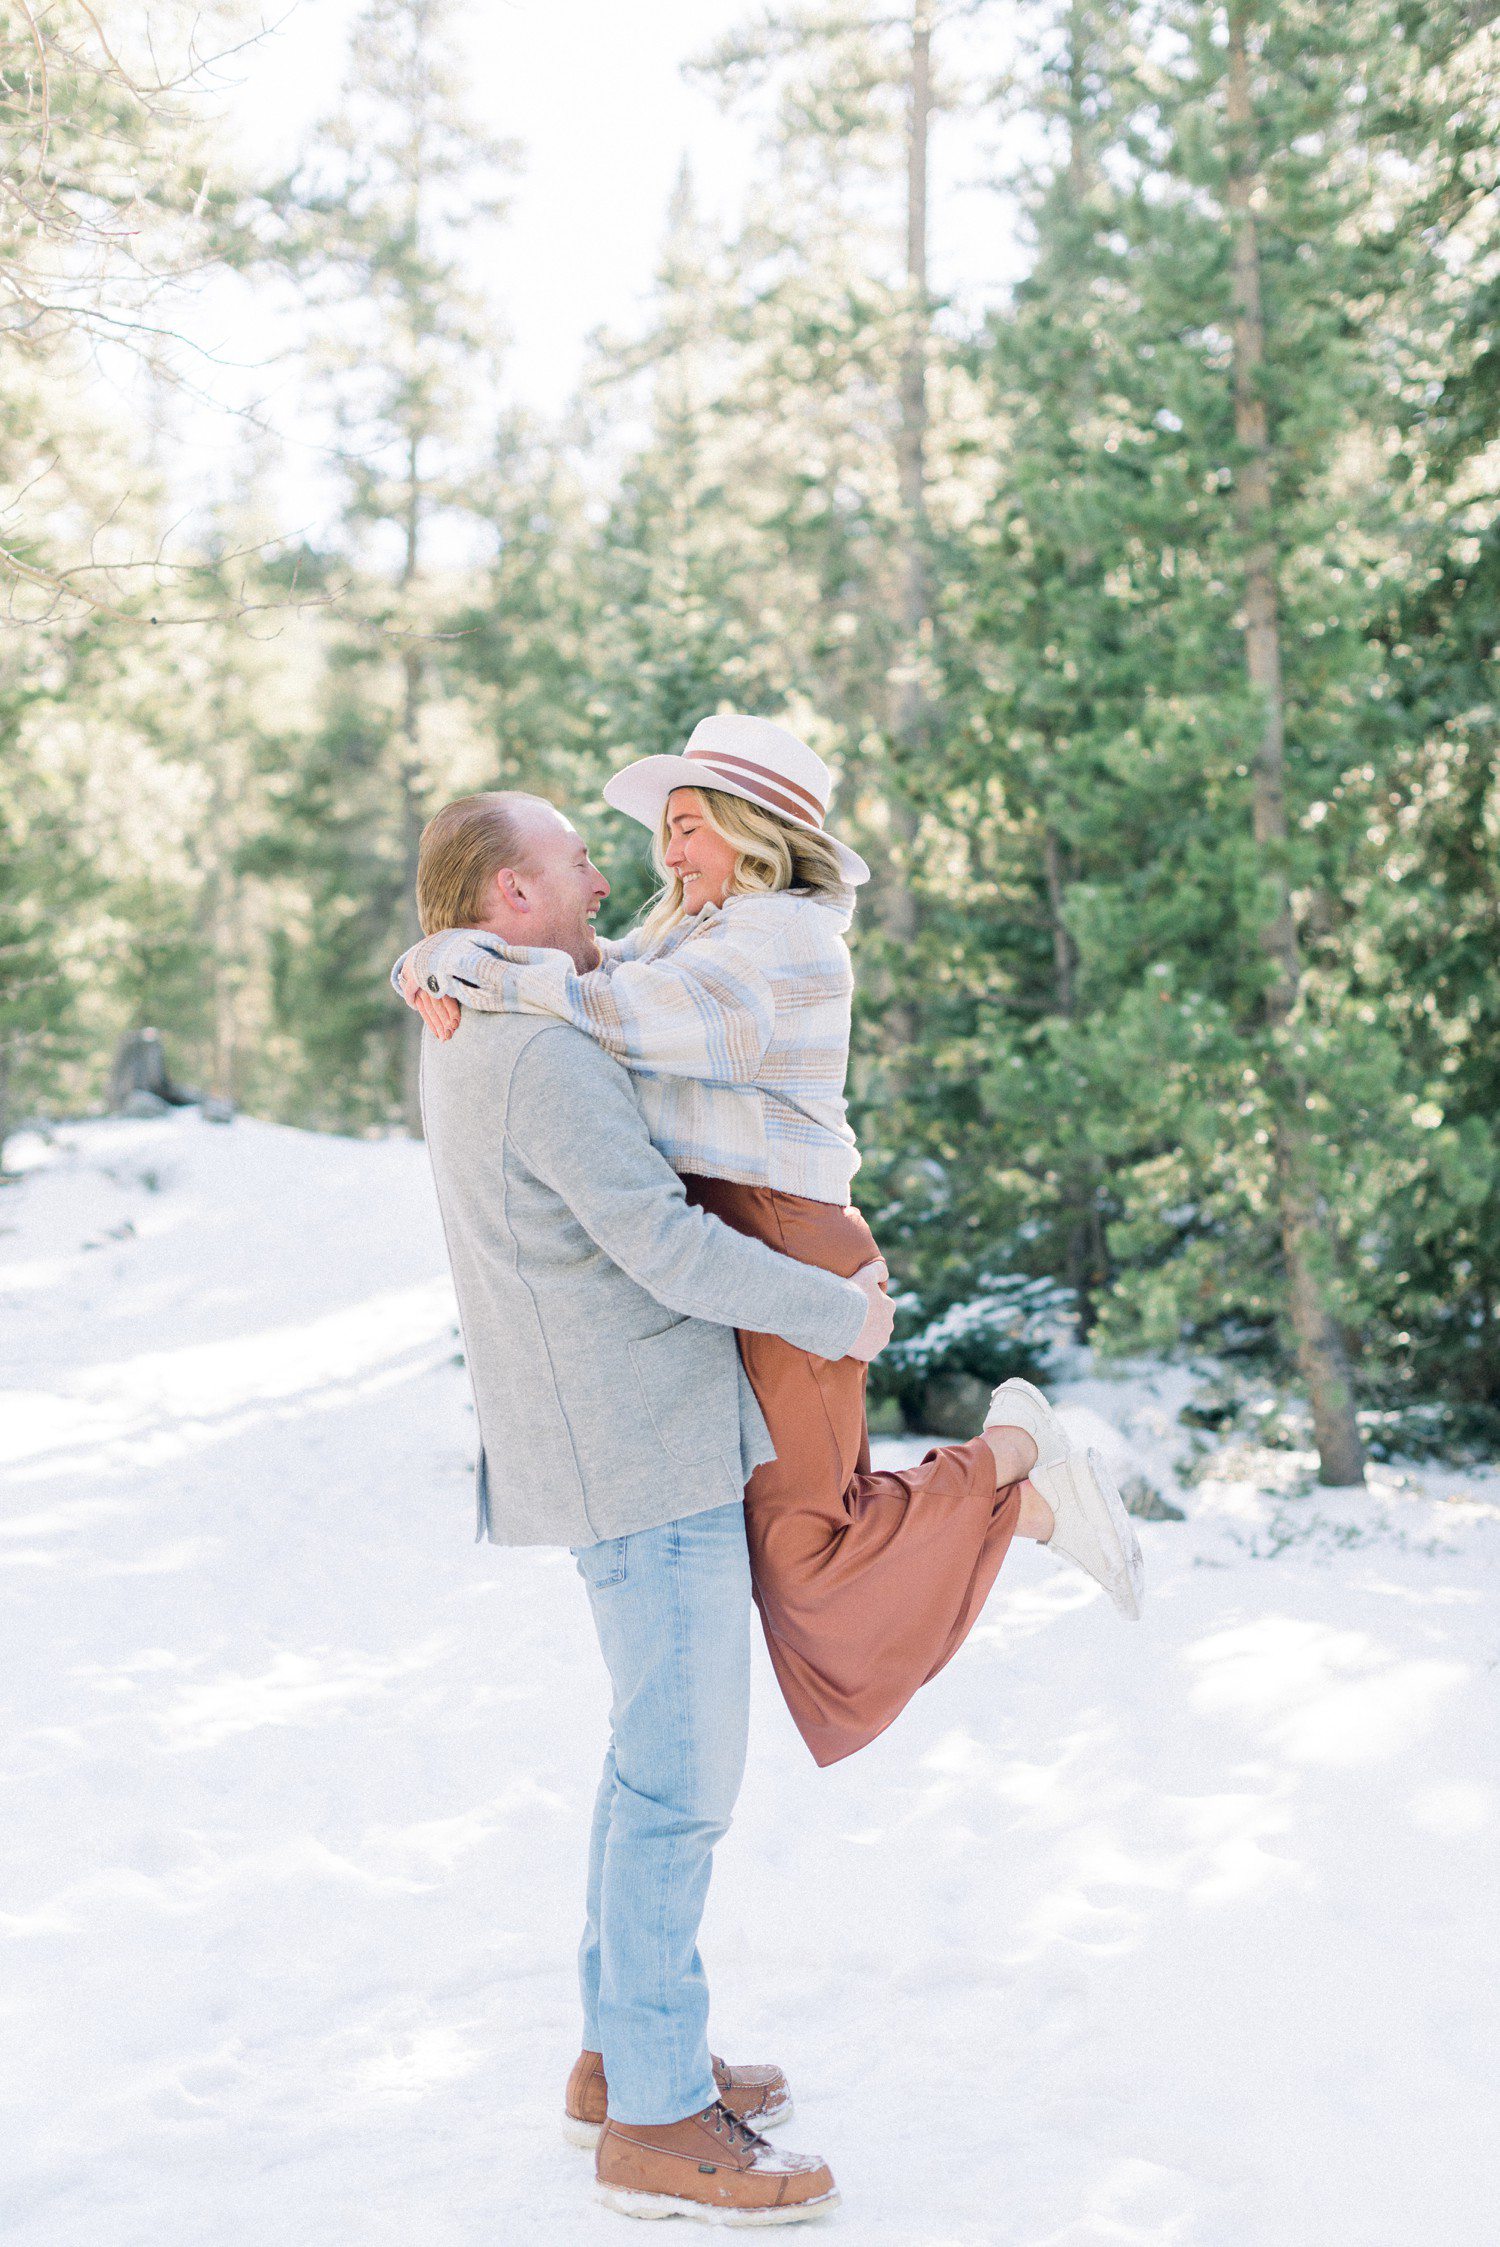 Winter Engagement Photos at Officer's Gulch near Vail, CO.